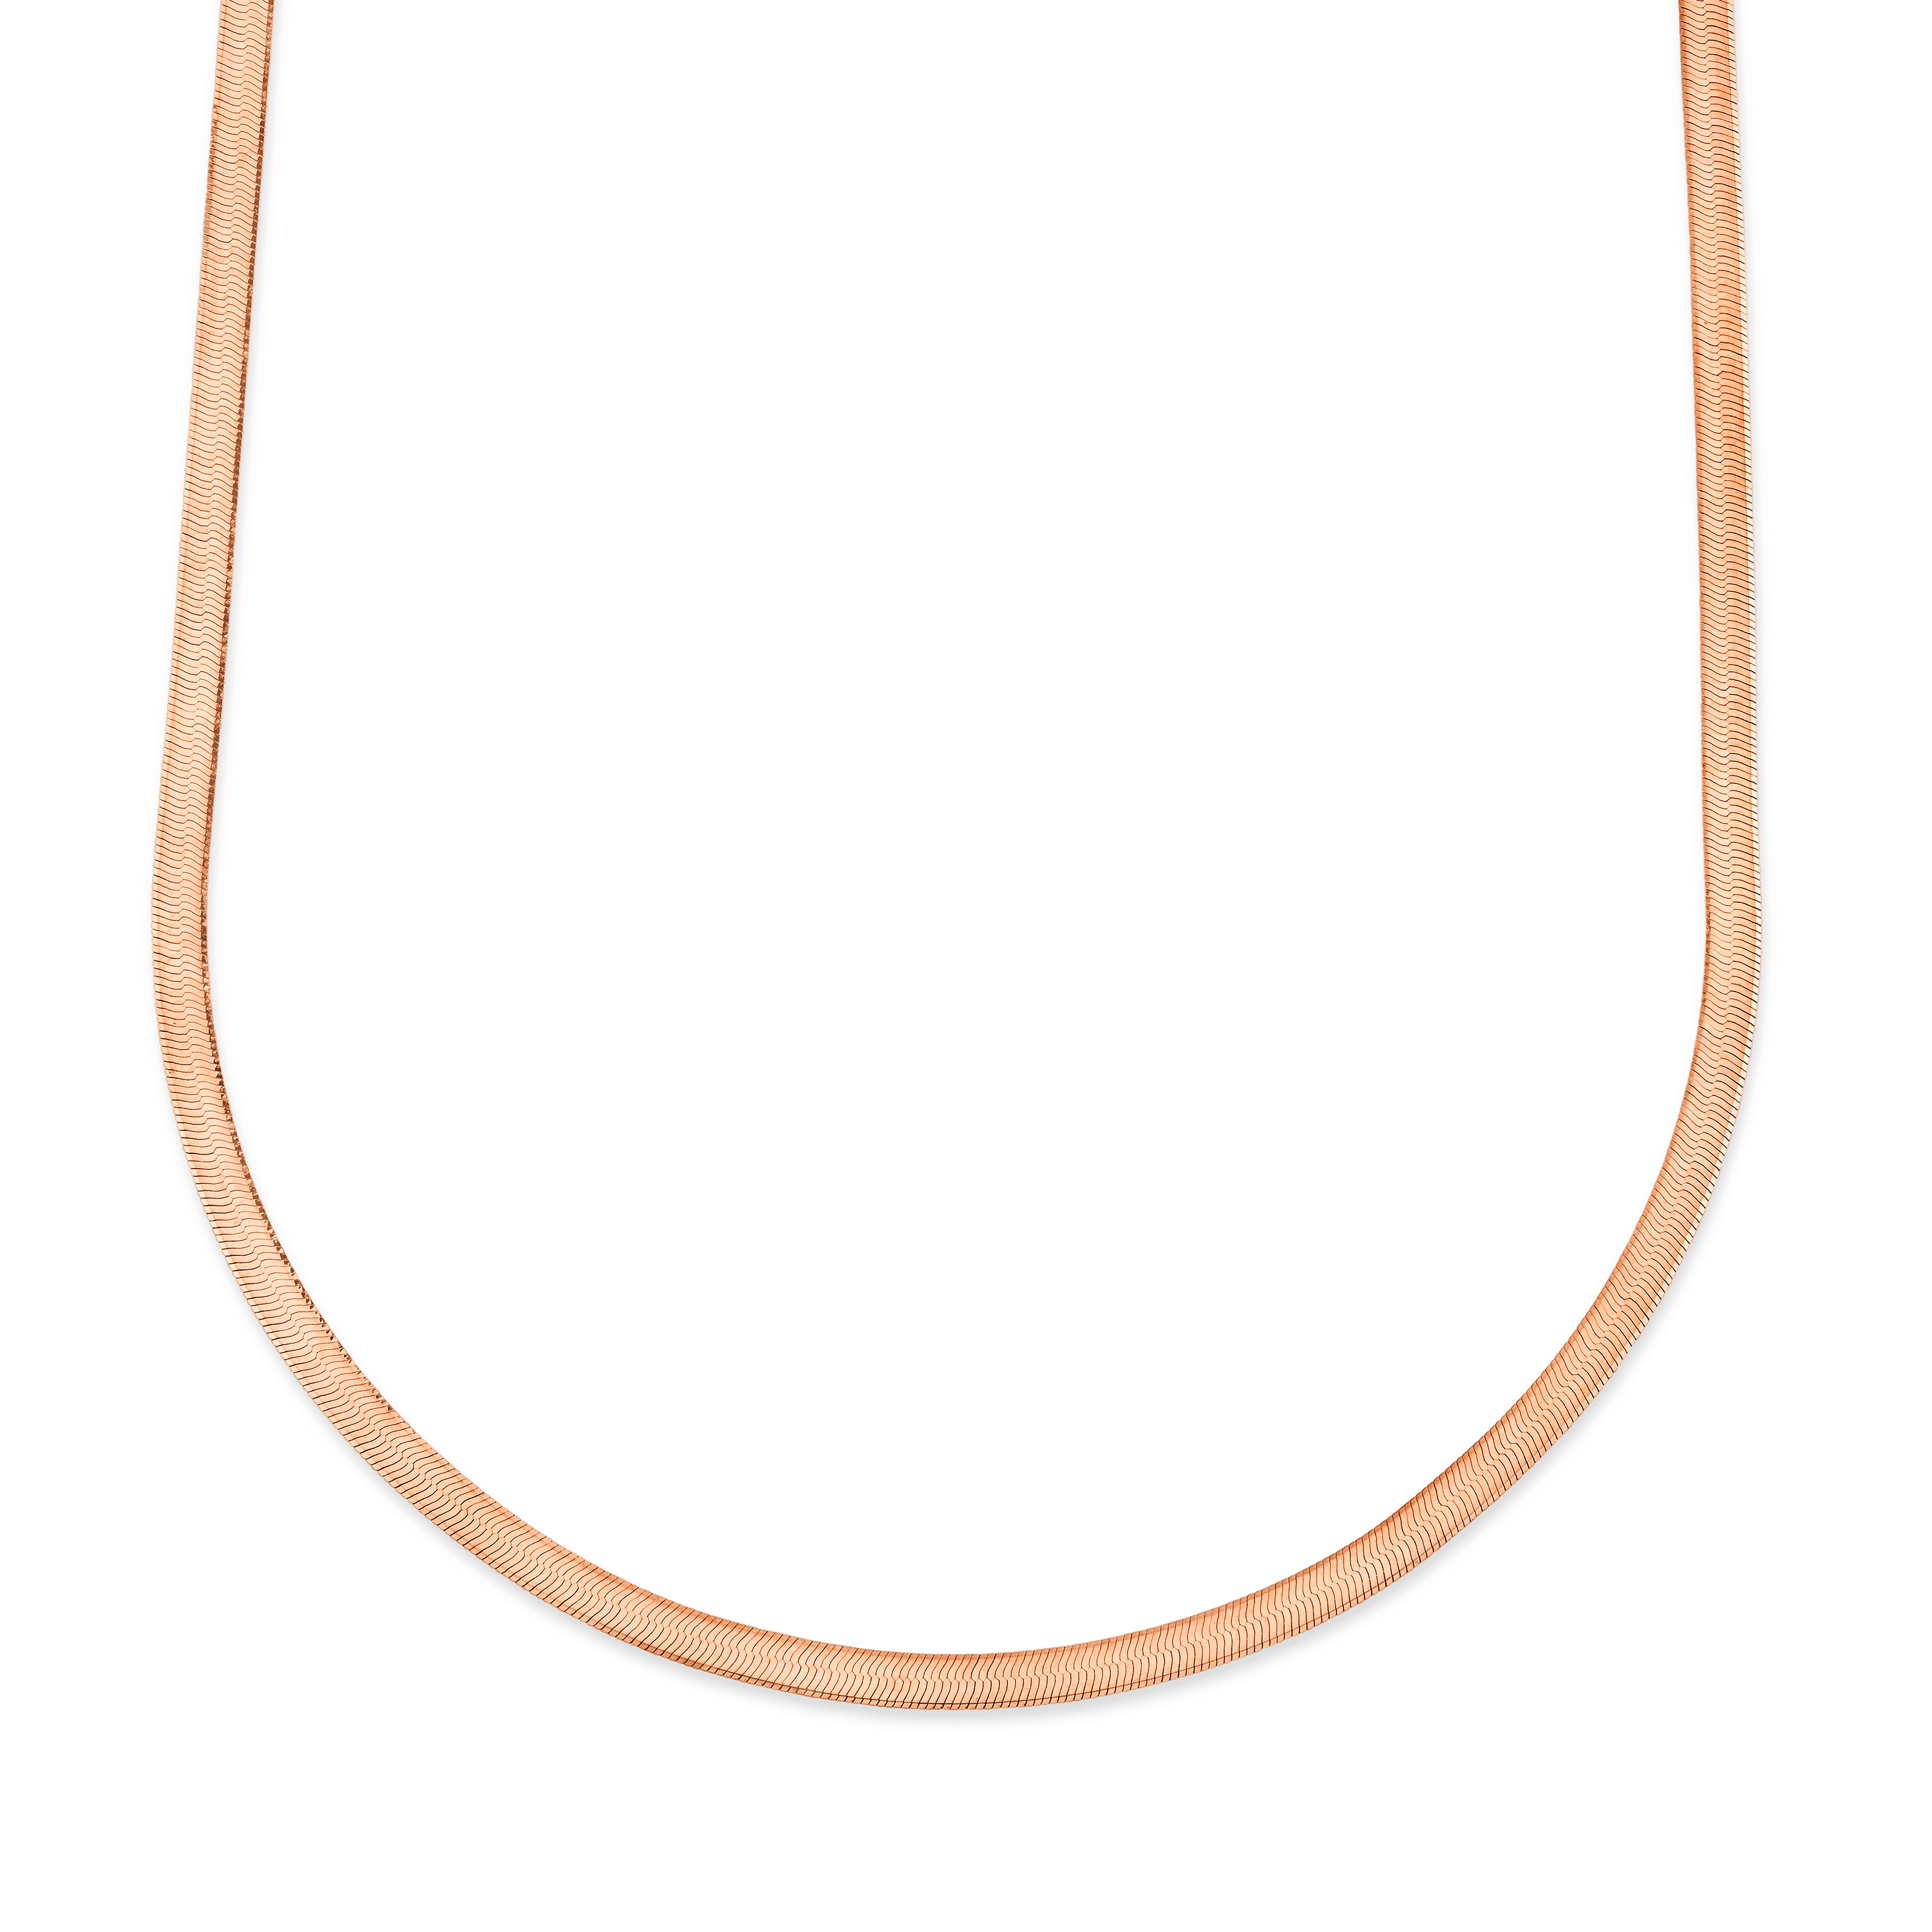 Download Gold Chain Png Image HQ PNG Image | FreePNGImg